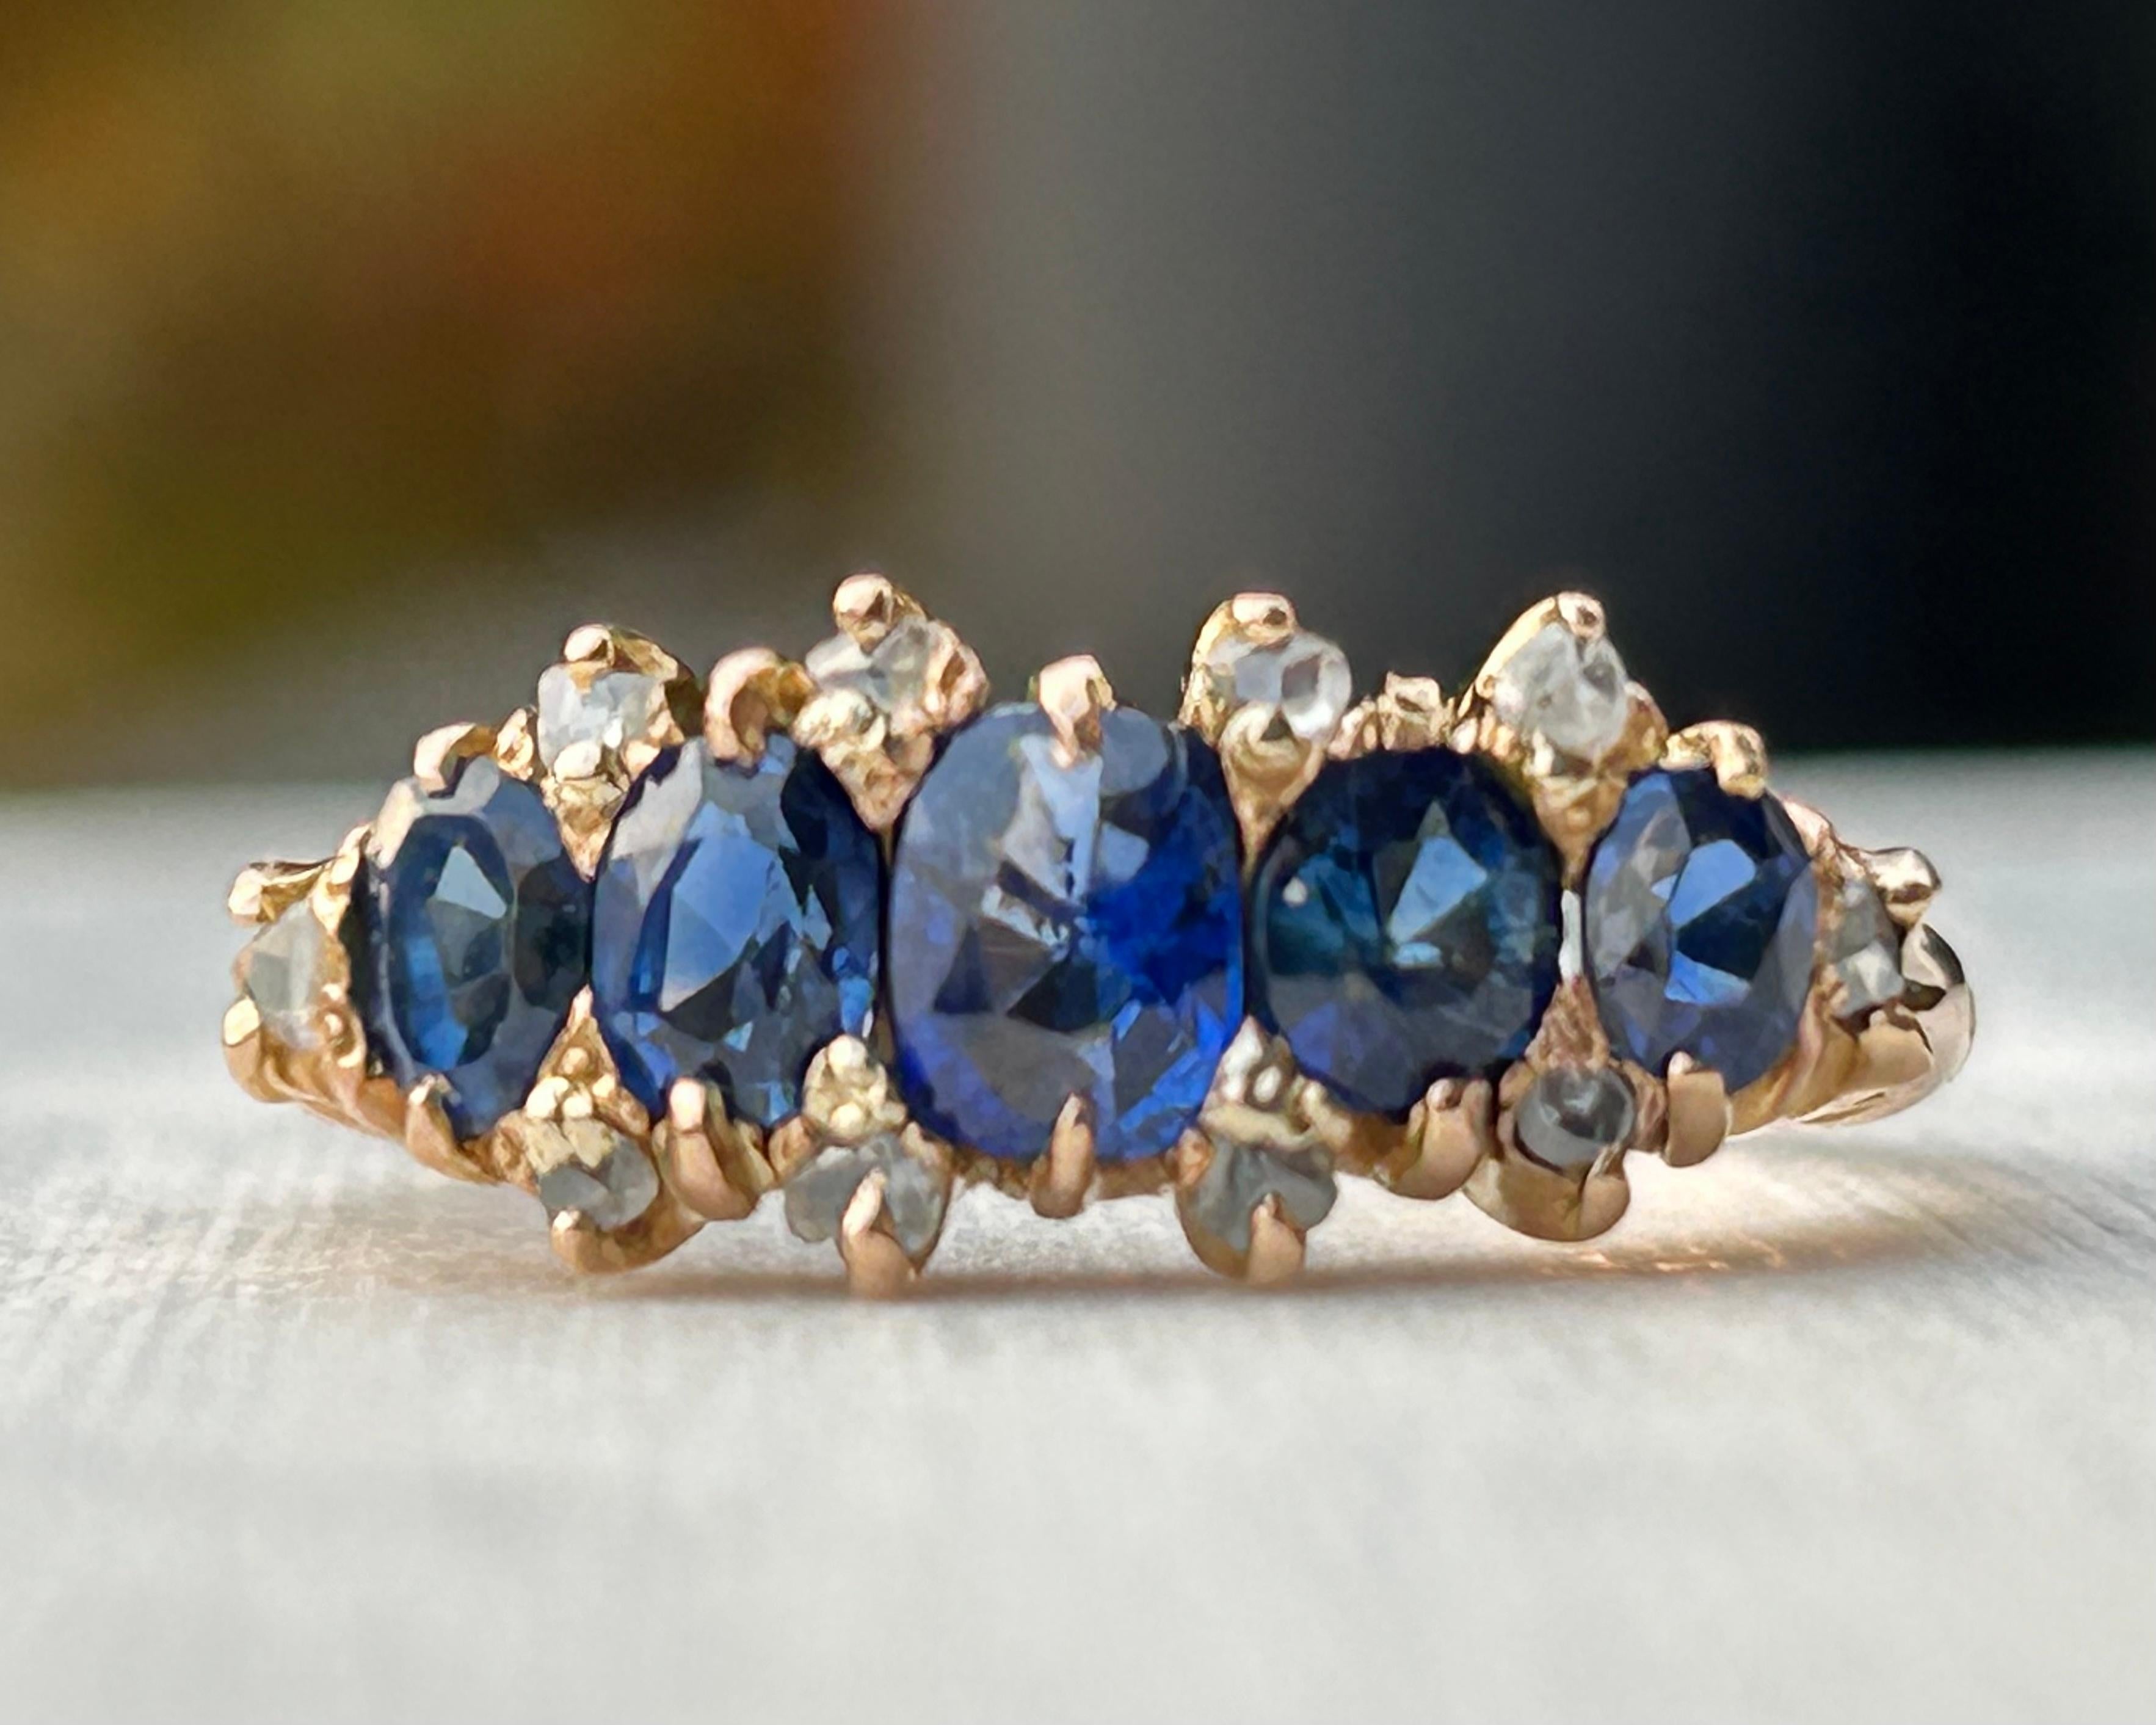 Handmade 18K rose gold, 5-stone vivid deep blue violet sapphire and rose cut diamond band. The band measures approximately 3.75mm at the shoulder, tapering to 1.45mm in width at the base, with stones spanning approximately 7.87mm in finger length.